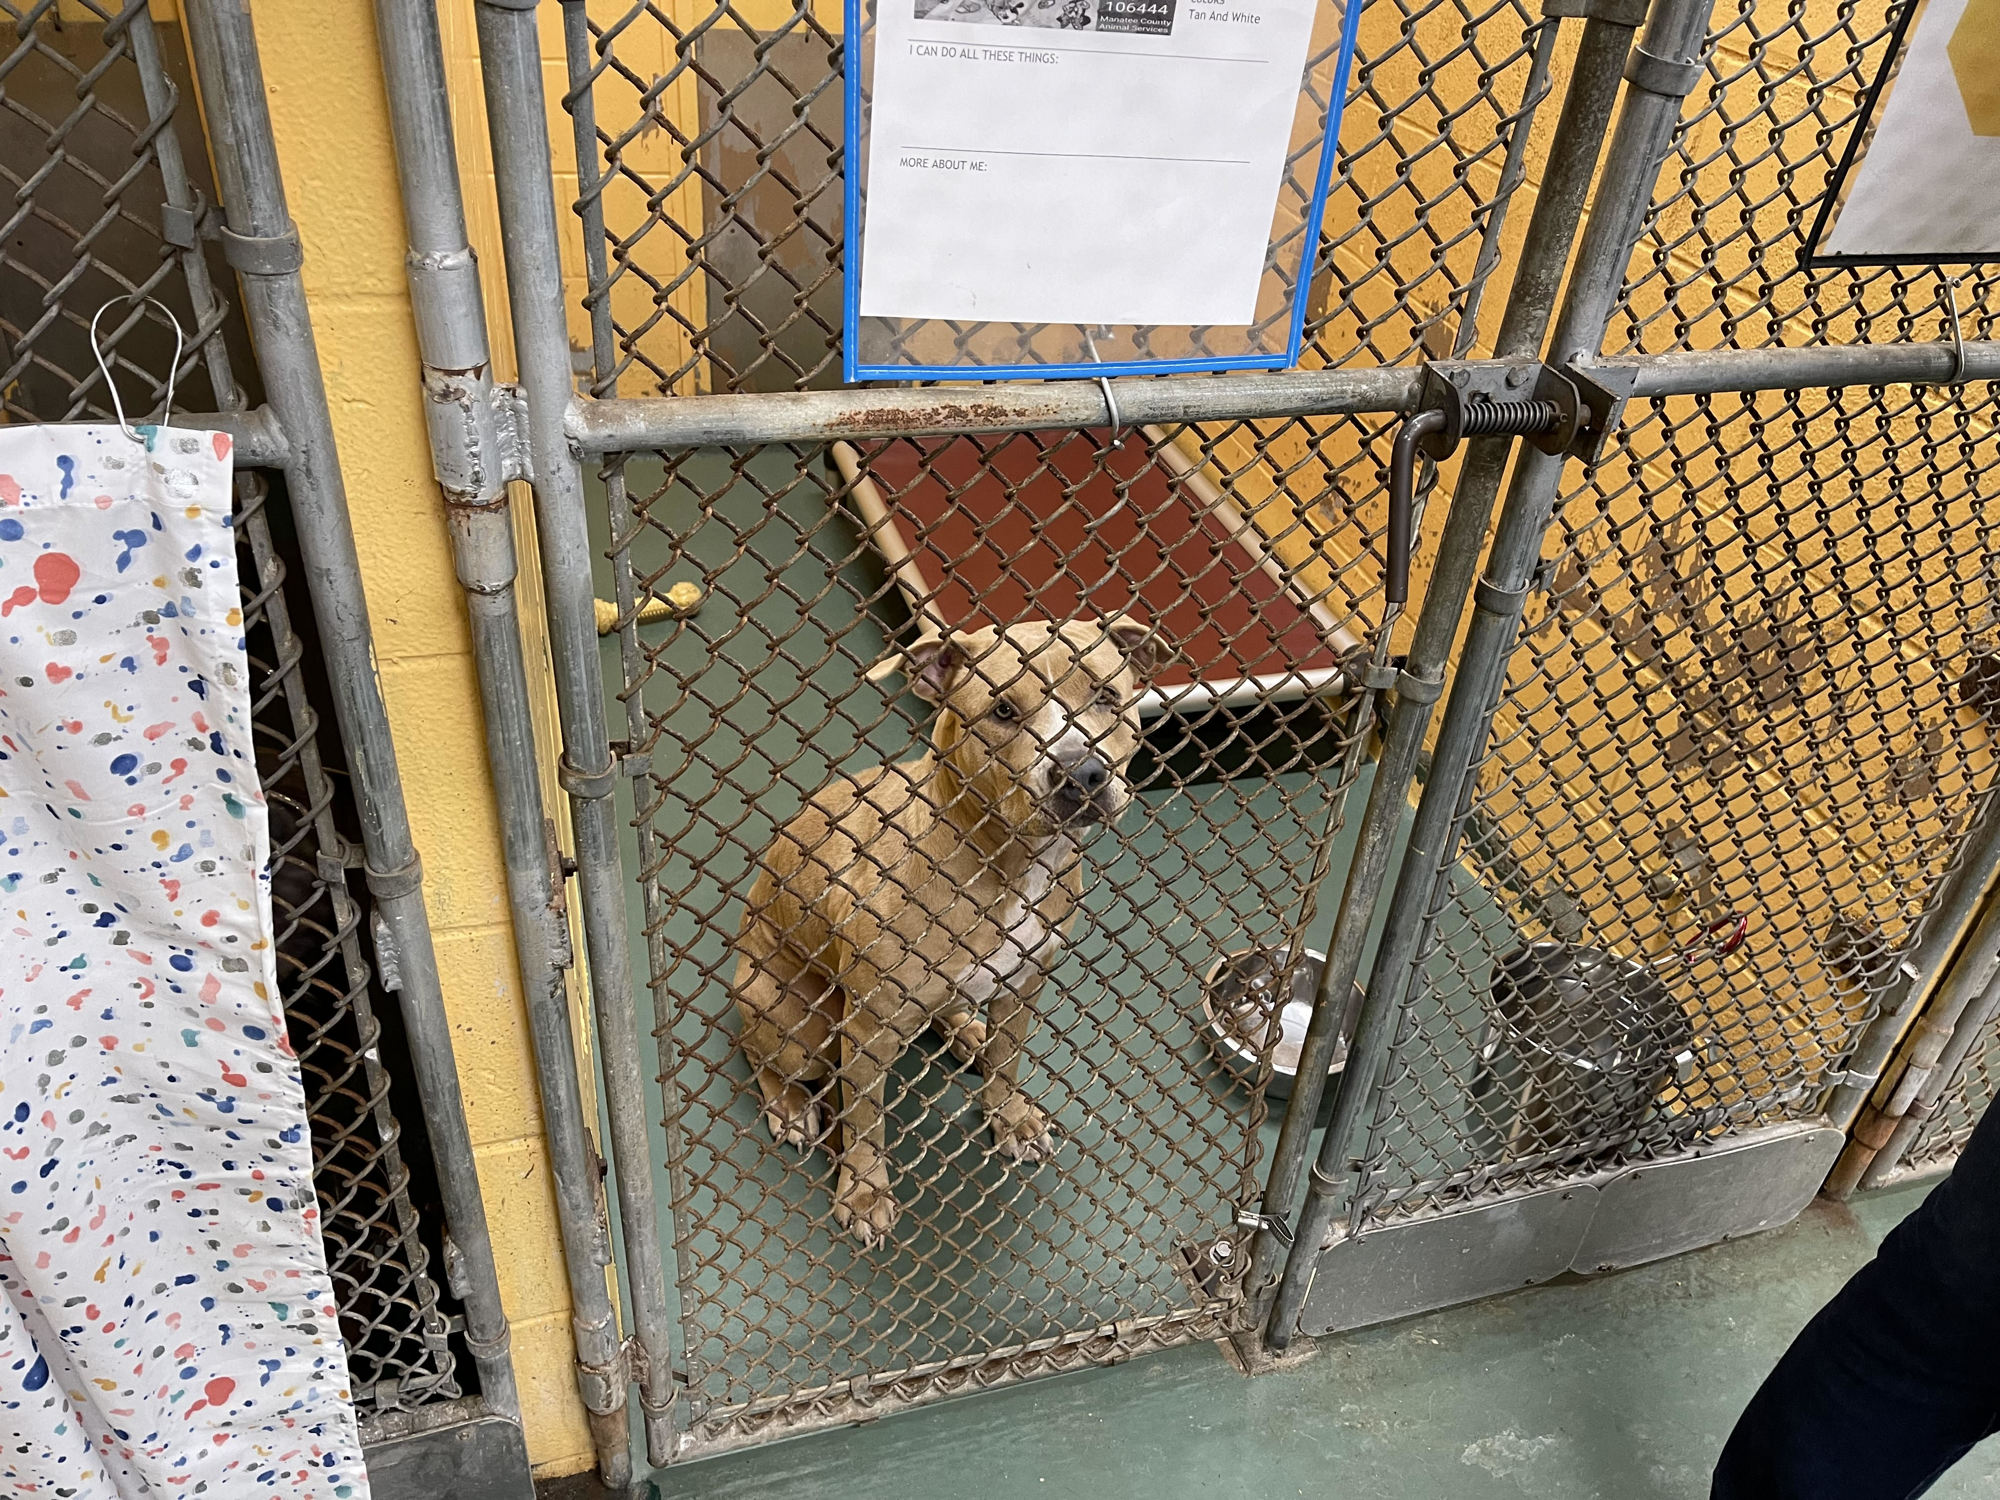 A dog awaits adoption inside a kennel at the Manatee Animal Shelter. Overcrowding means that guillotine doors meant to give dogs more room and access to go in and out must remain closed. Photo by Scott Lockwood